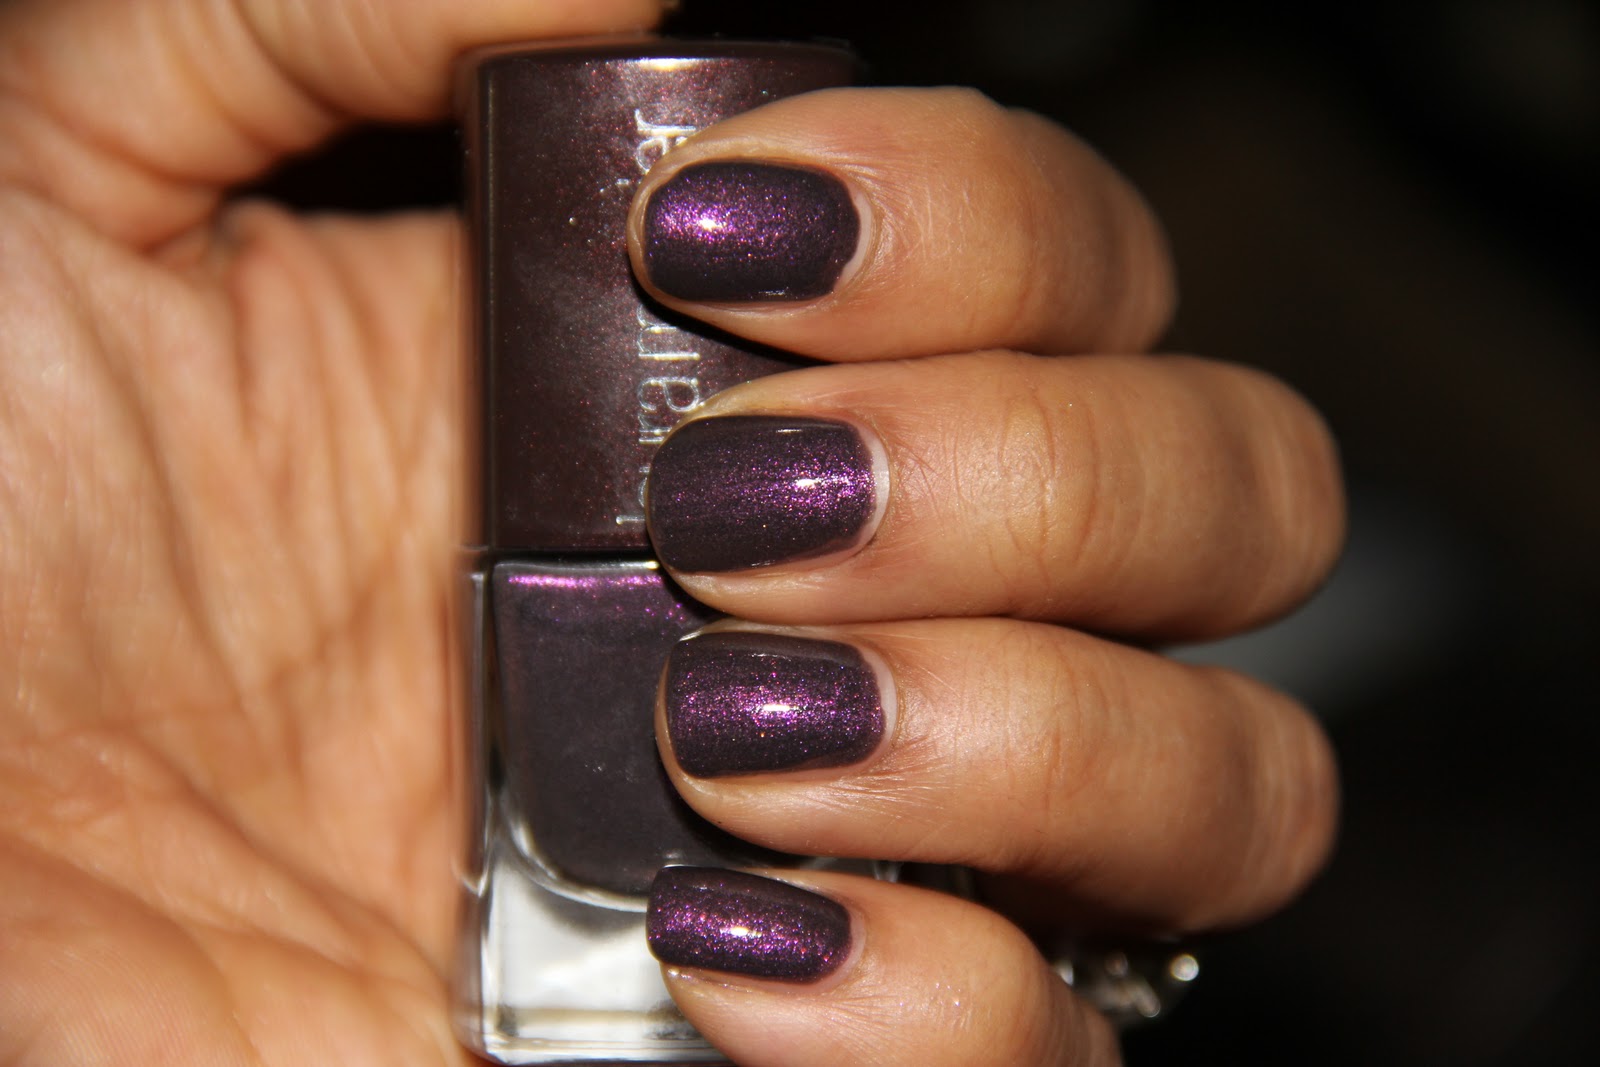 2. Laura Mercier Nail Lacquer in Gold - wide 4